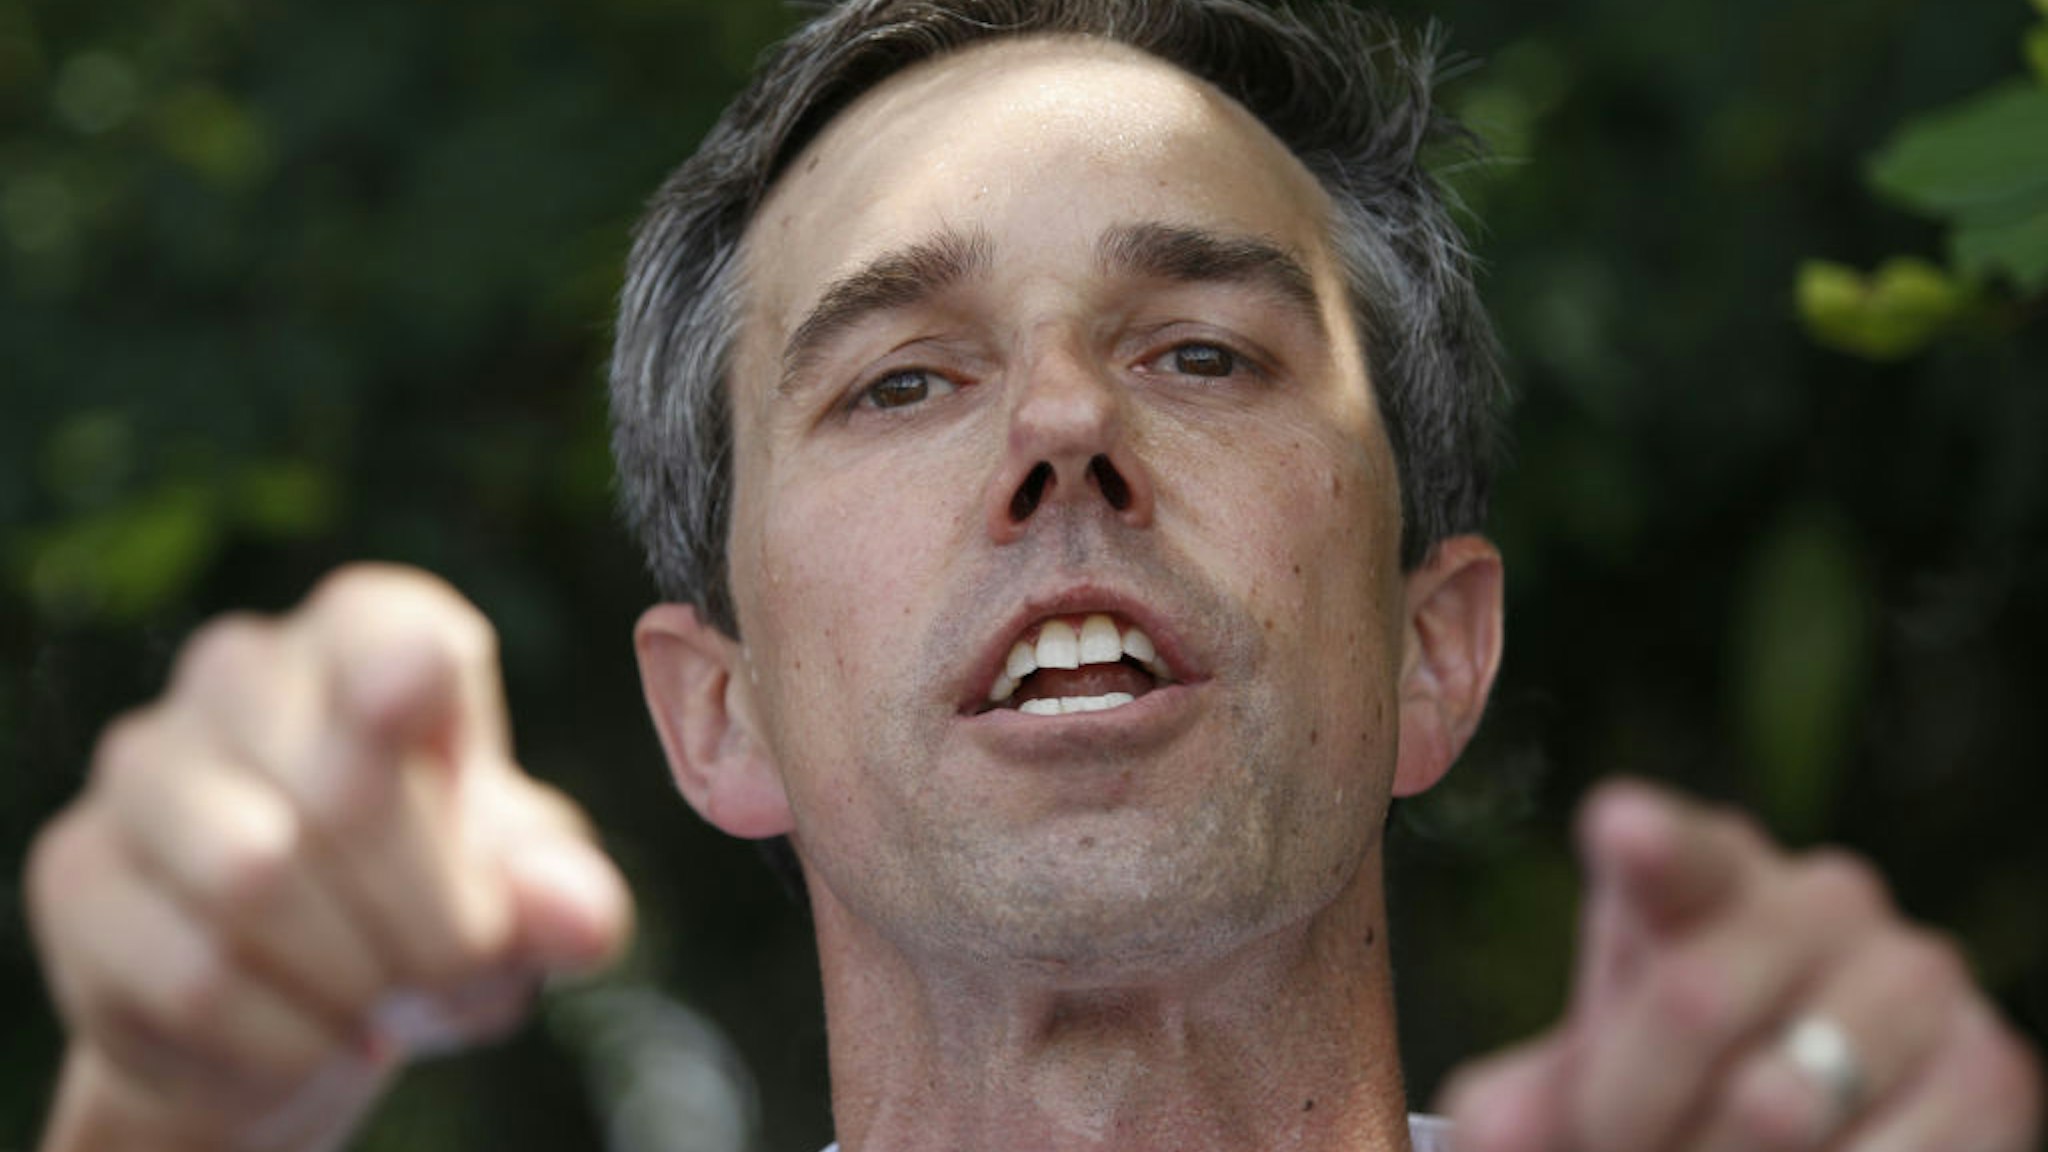 Beto O'Rourke, former Representative from Texas and 2020 Democratic presidential candidate, gestures while speaking outside the Homestead Temporary Shelter for Unaccompanied Children in Homestead, Florida, U.S., on Thursday, June 27, 2019. In the first Democratic presidential debate of the 2020 election, O'Rourke got roughed up by other candidates for backing private health insurance, refusing to support decriminalizing crossing the border and for not directly answering questions from the moderators.